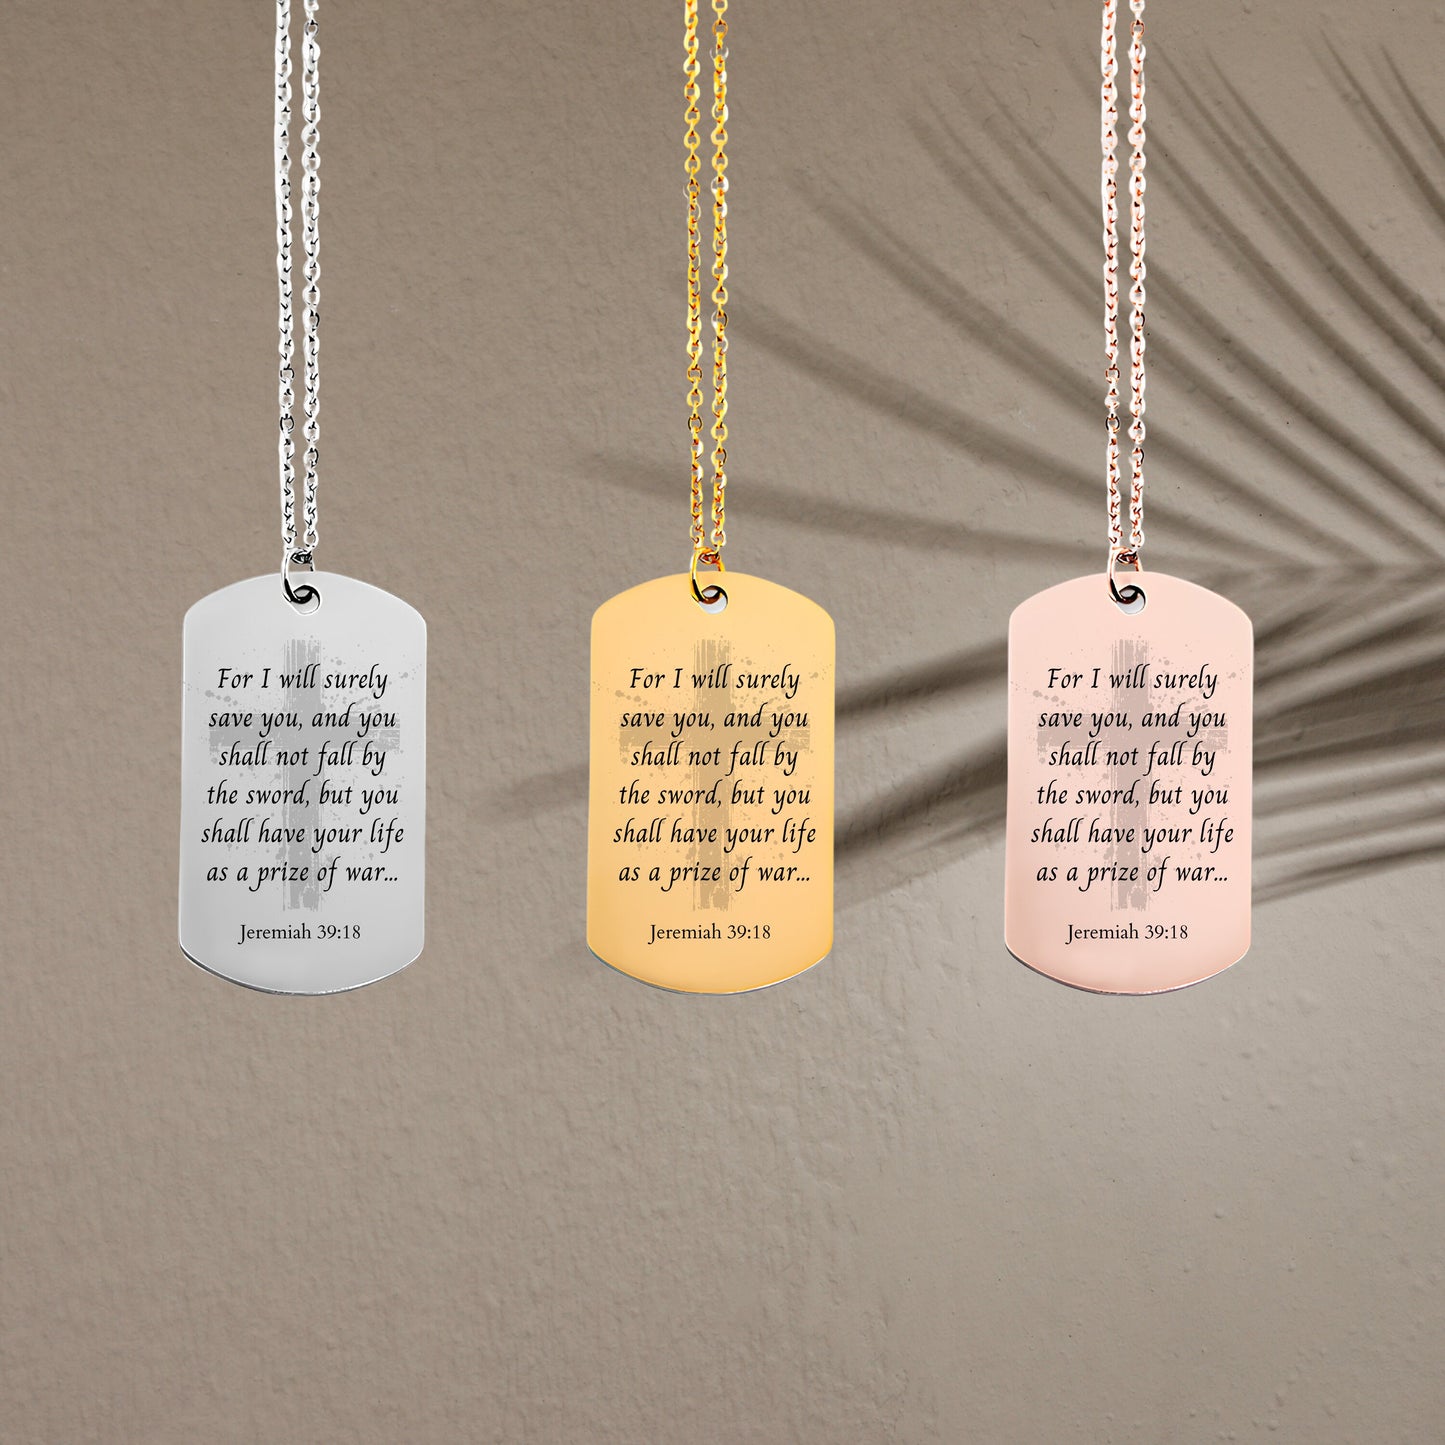 Jeremiah 39 18 quote necklace, gold bible verse, 14k gold cross charm necklace, confirmation gift, gold bar tag necklace,religious scripture